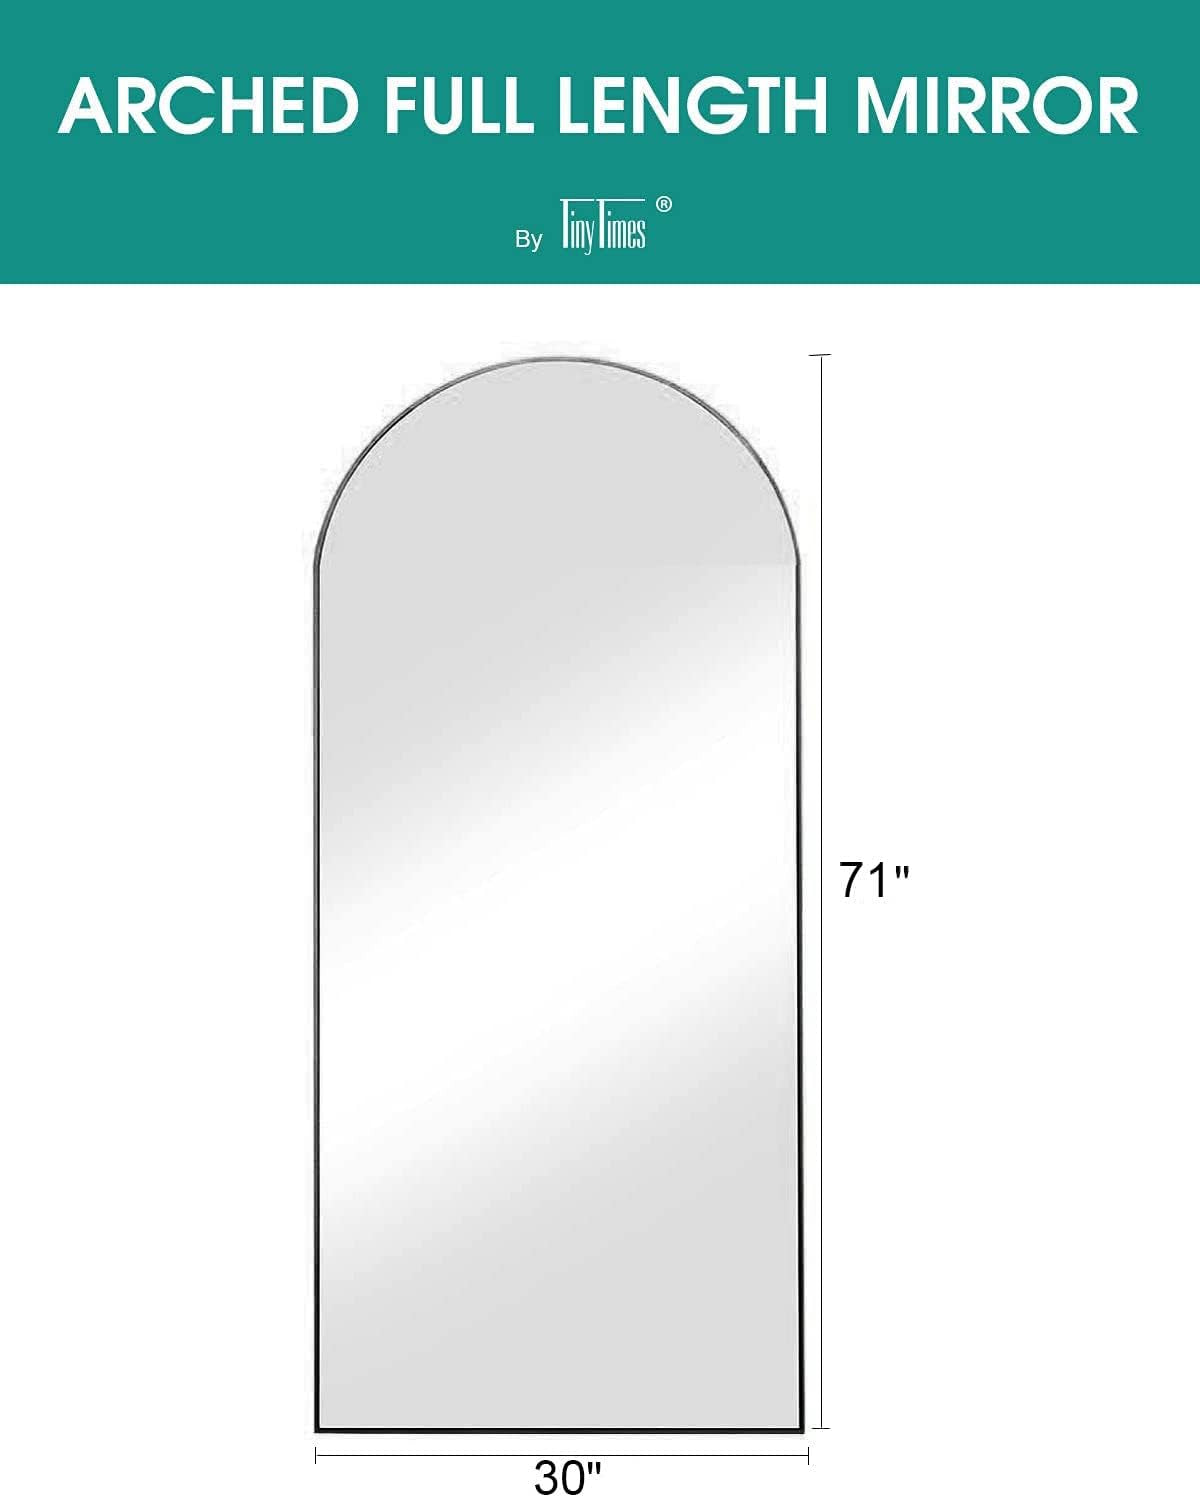 71''X30'' Arched Full Length Floor Mirror Large Mirror Full Length with Stand, Big Full Body Mirror for Bedroom, Living Room, Oversized Mirror for Wall Mounted,Hanging Mirror,Black - Design By Technique